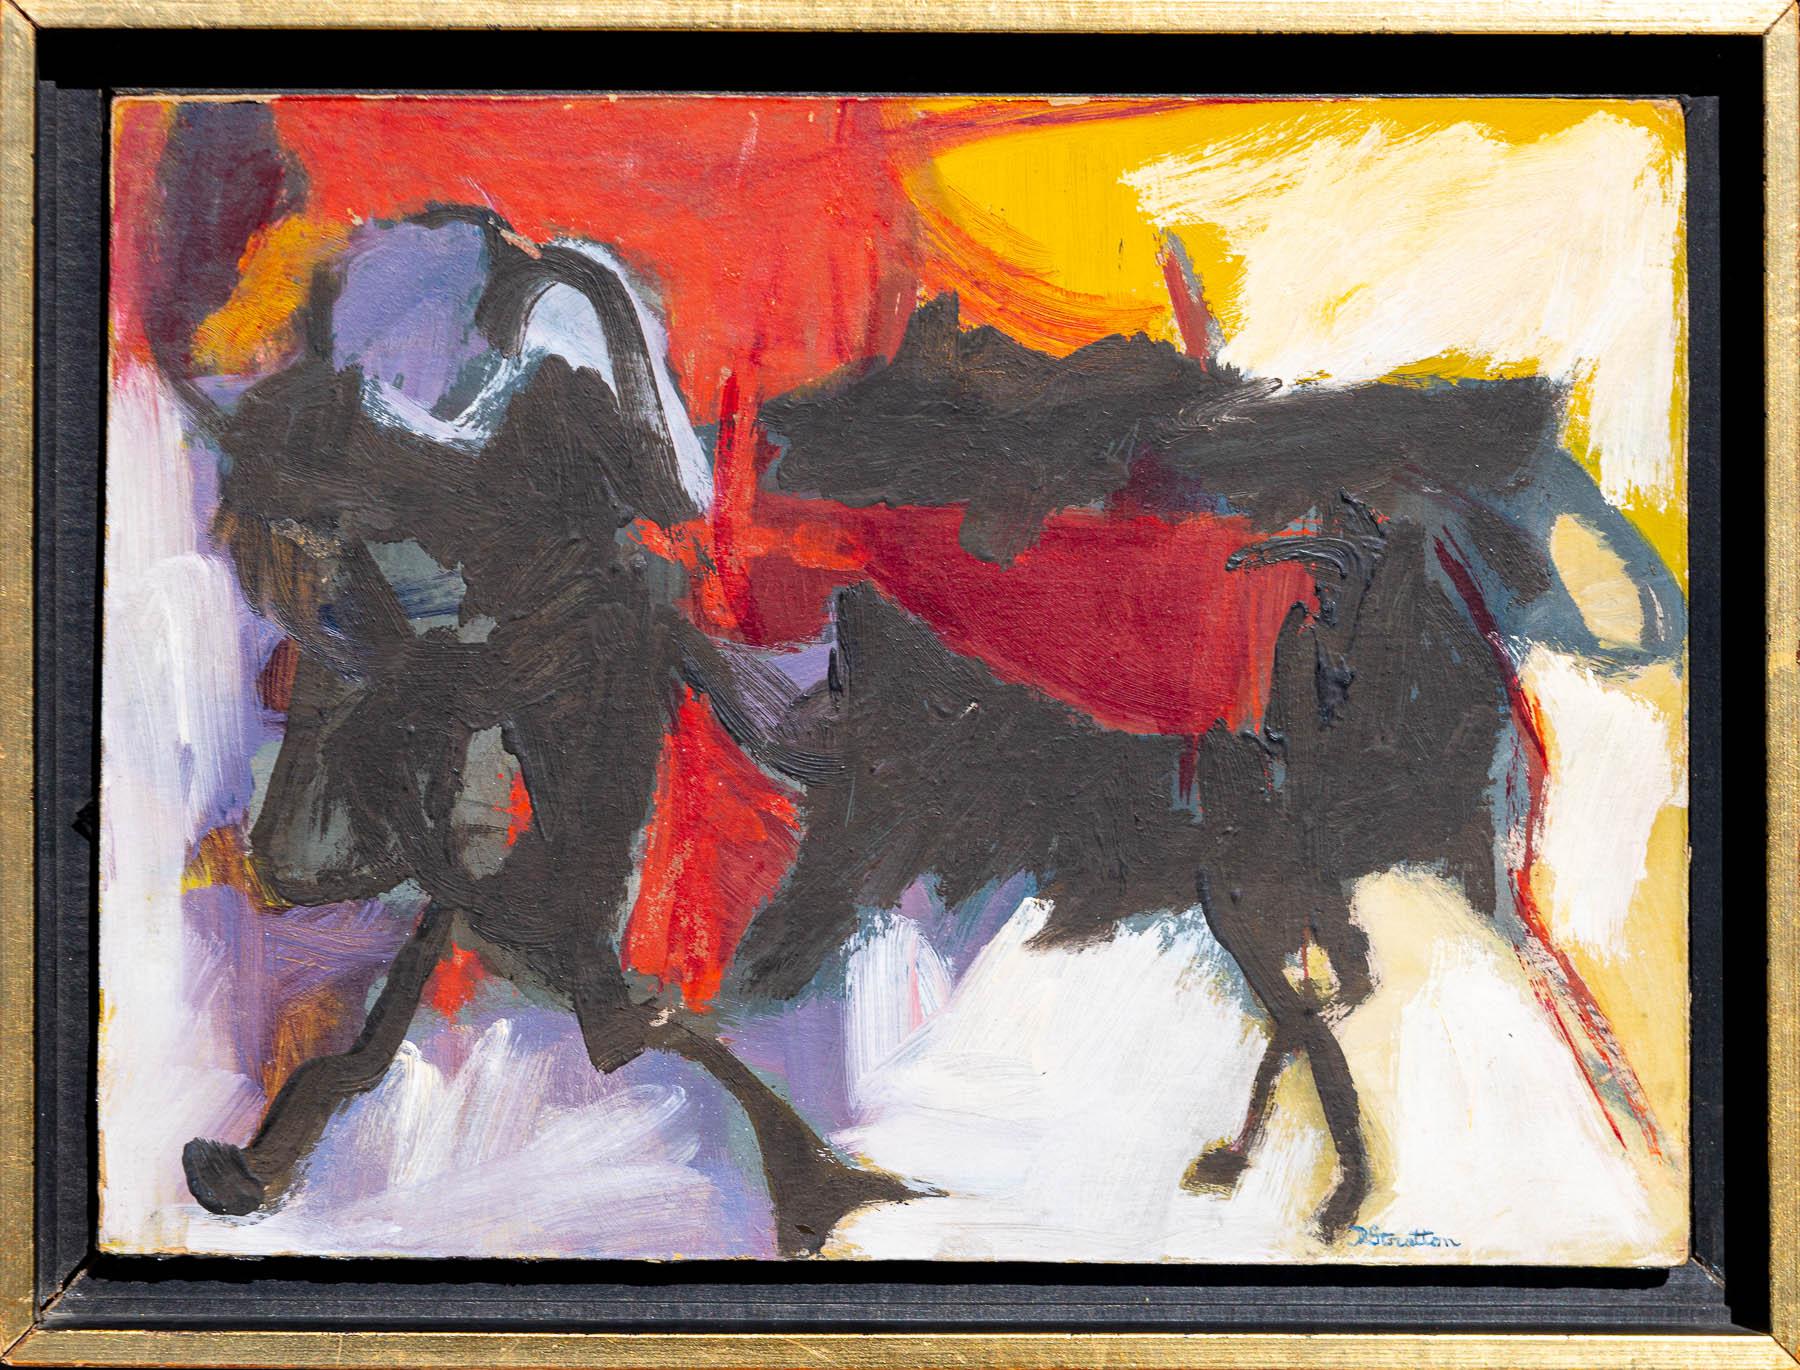 Study #13 Sunday's bull was very brave - Painting by Dorothy Stratton King